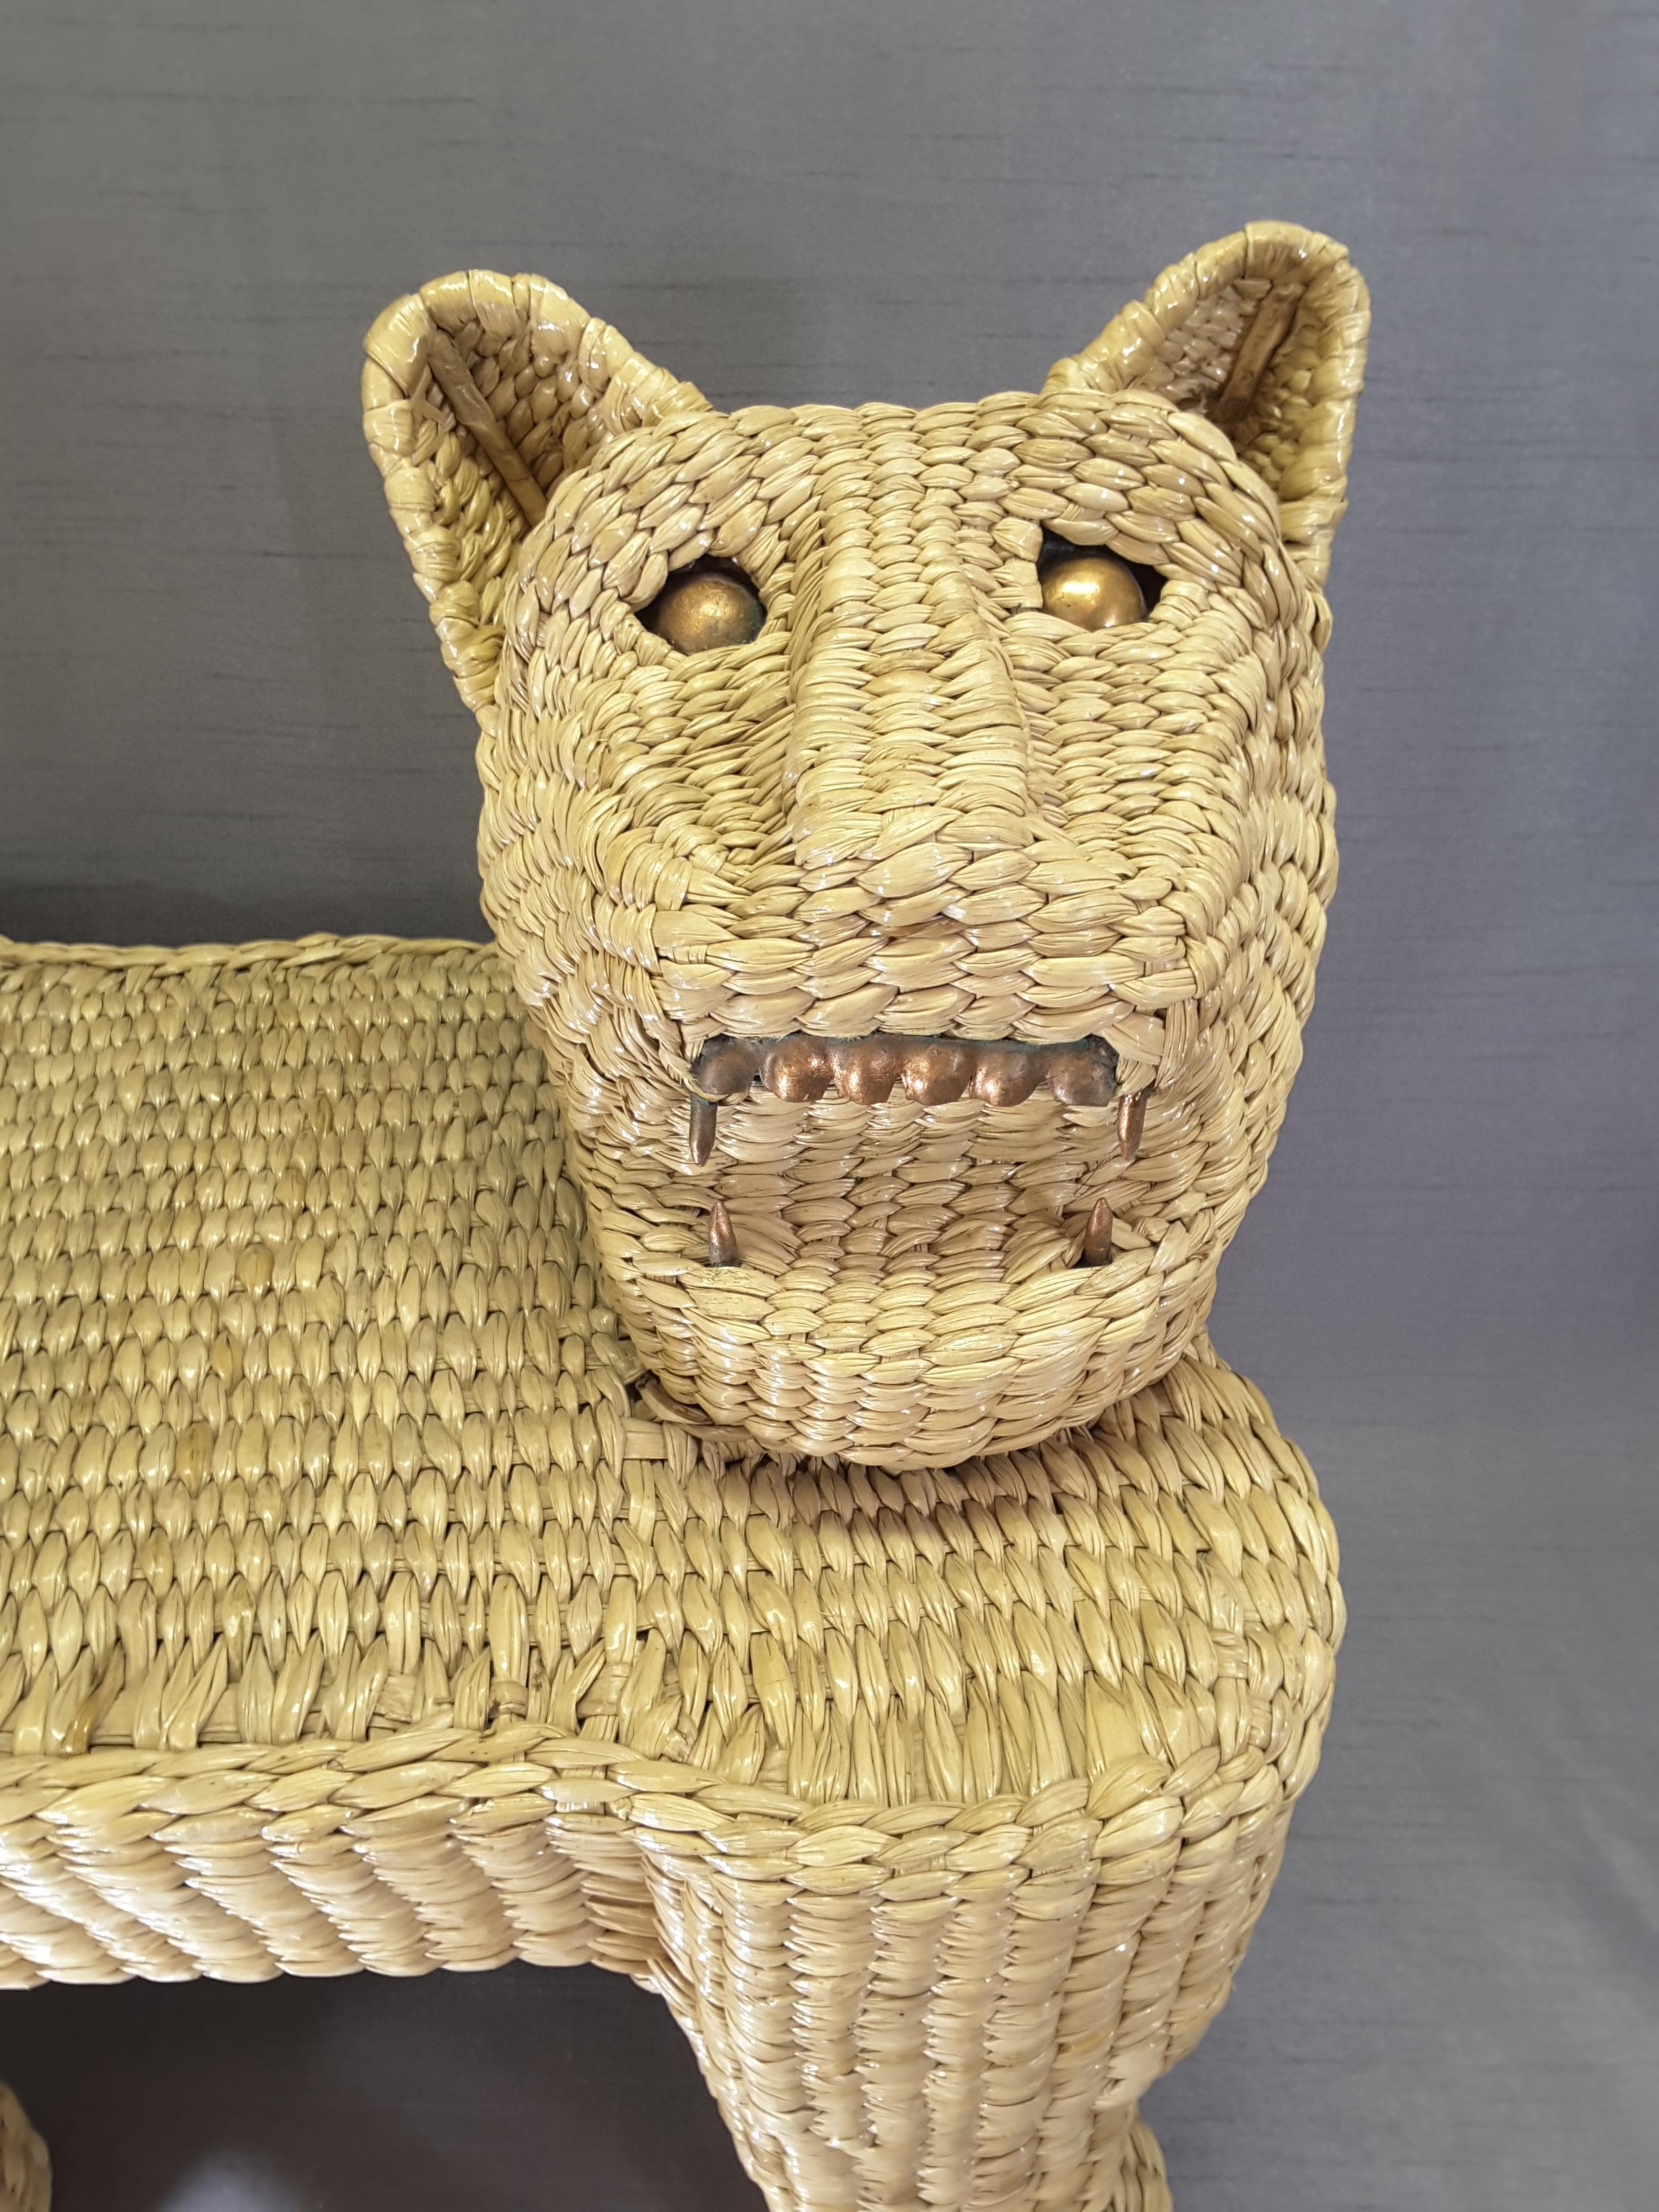 Mario Lopez Torres Wicker Panther stool, Made in the early 1970s.

Panther stool or could be used for a small table. The Panther has copper teeth and eye's, none are missing. There is no damage or missing sections, label has been removed, but will